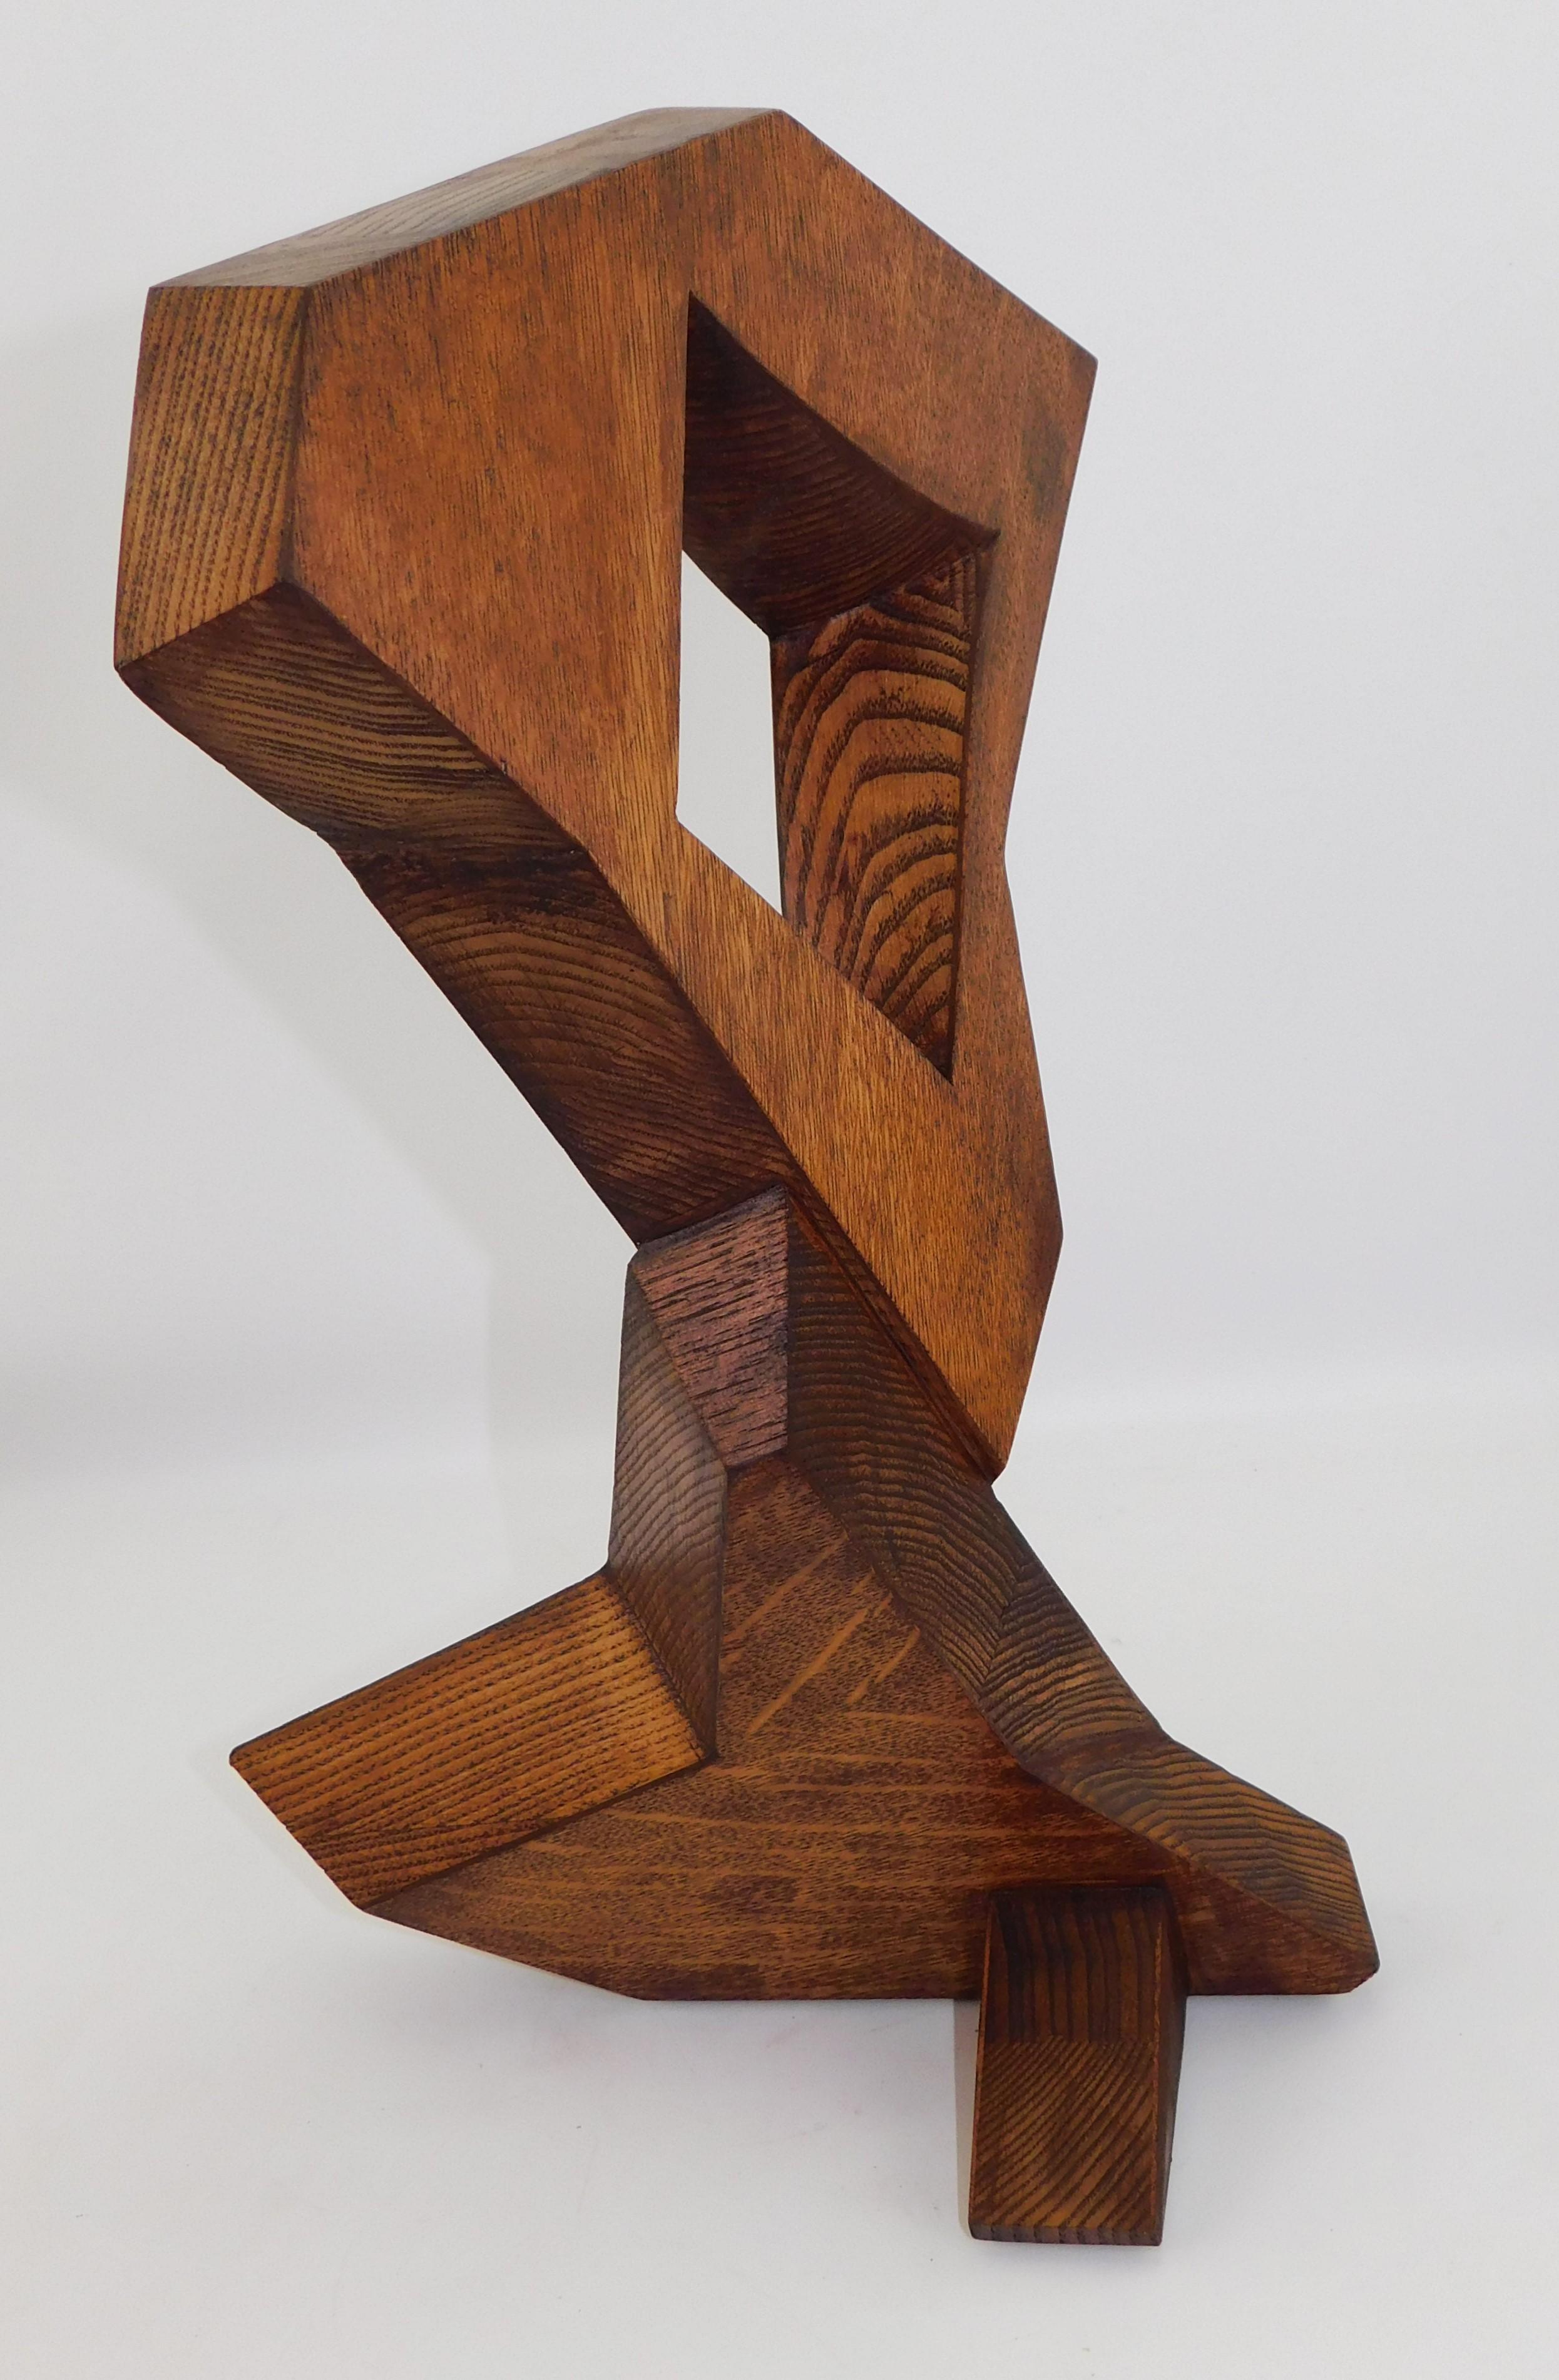 Hand-Crafted Signed Modern Abstract Constructivist Styled Wooden Oak Sculpture Czeslaw Budny For Sale